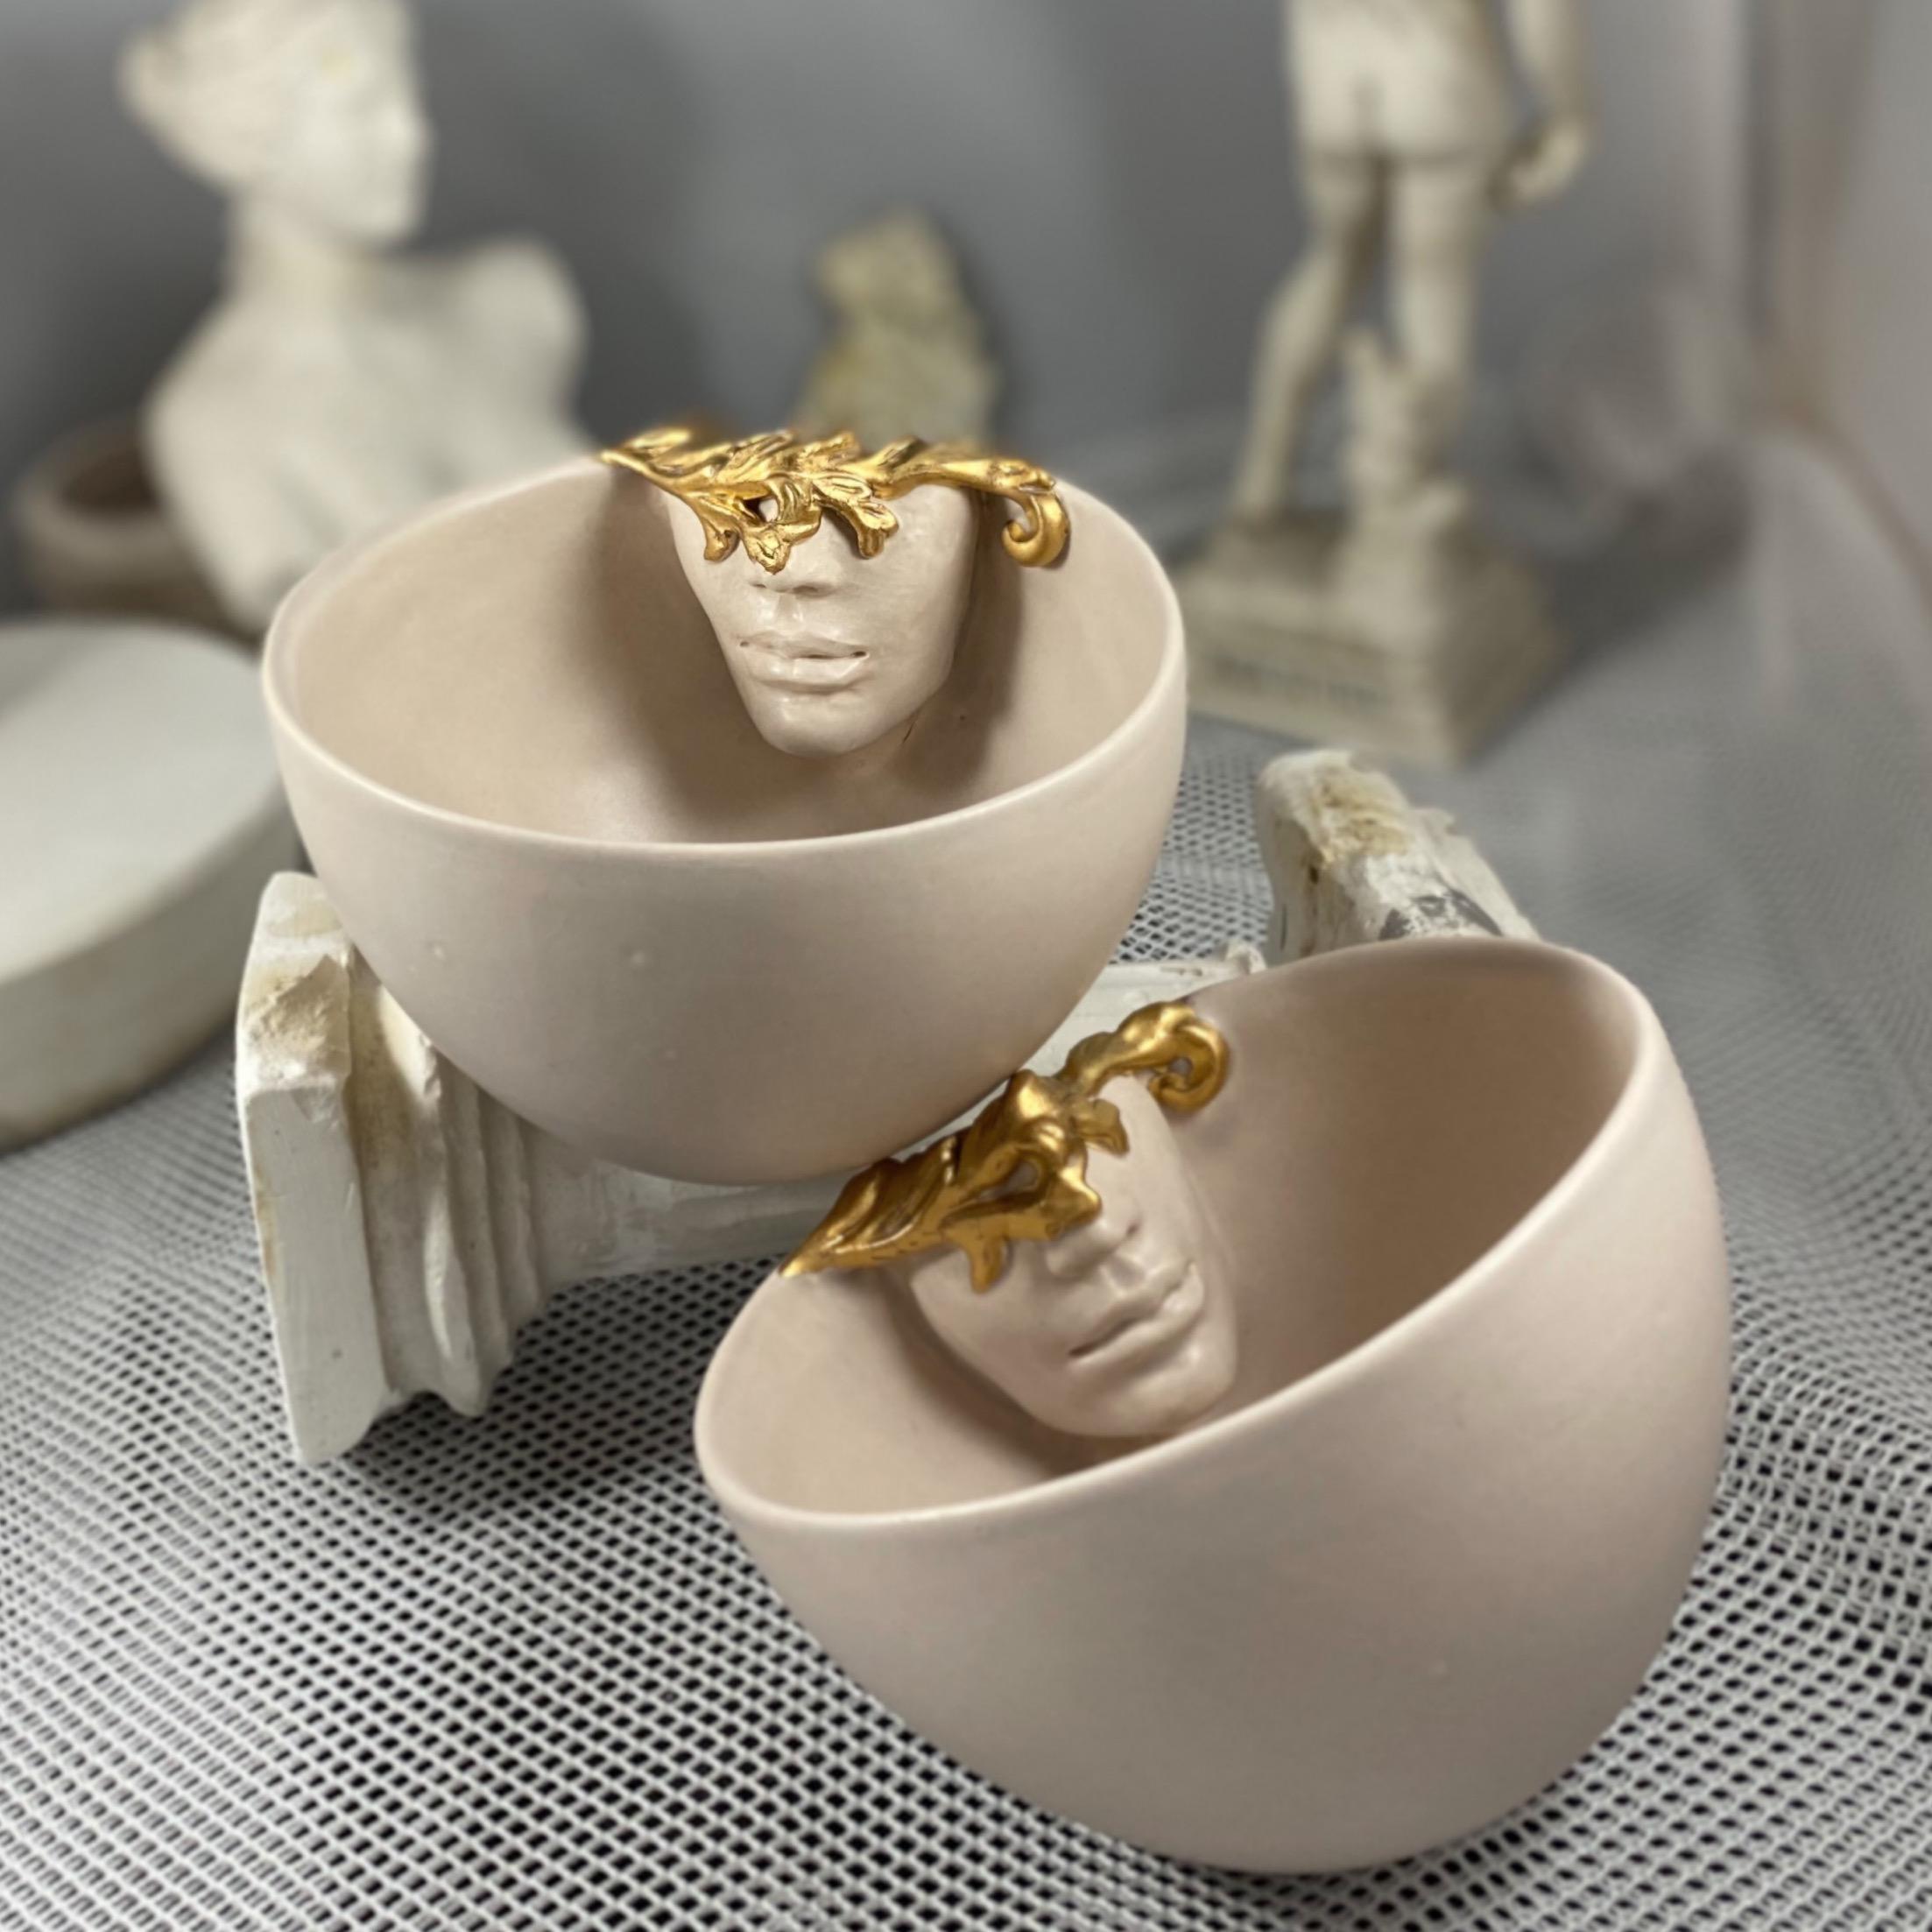 A set of 2 ceramic cups handmade by the ceramic artist Hulya Sozer. 
12k Gold Lustered. Food safe glaze. Non-toxic materials and leadfree. 
It's suitable for washing in the dishwasher however hand washing is recommended.

Height: 10,5cm / Diameter: